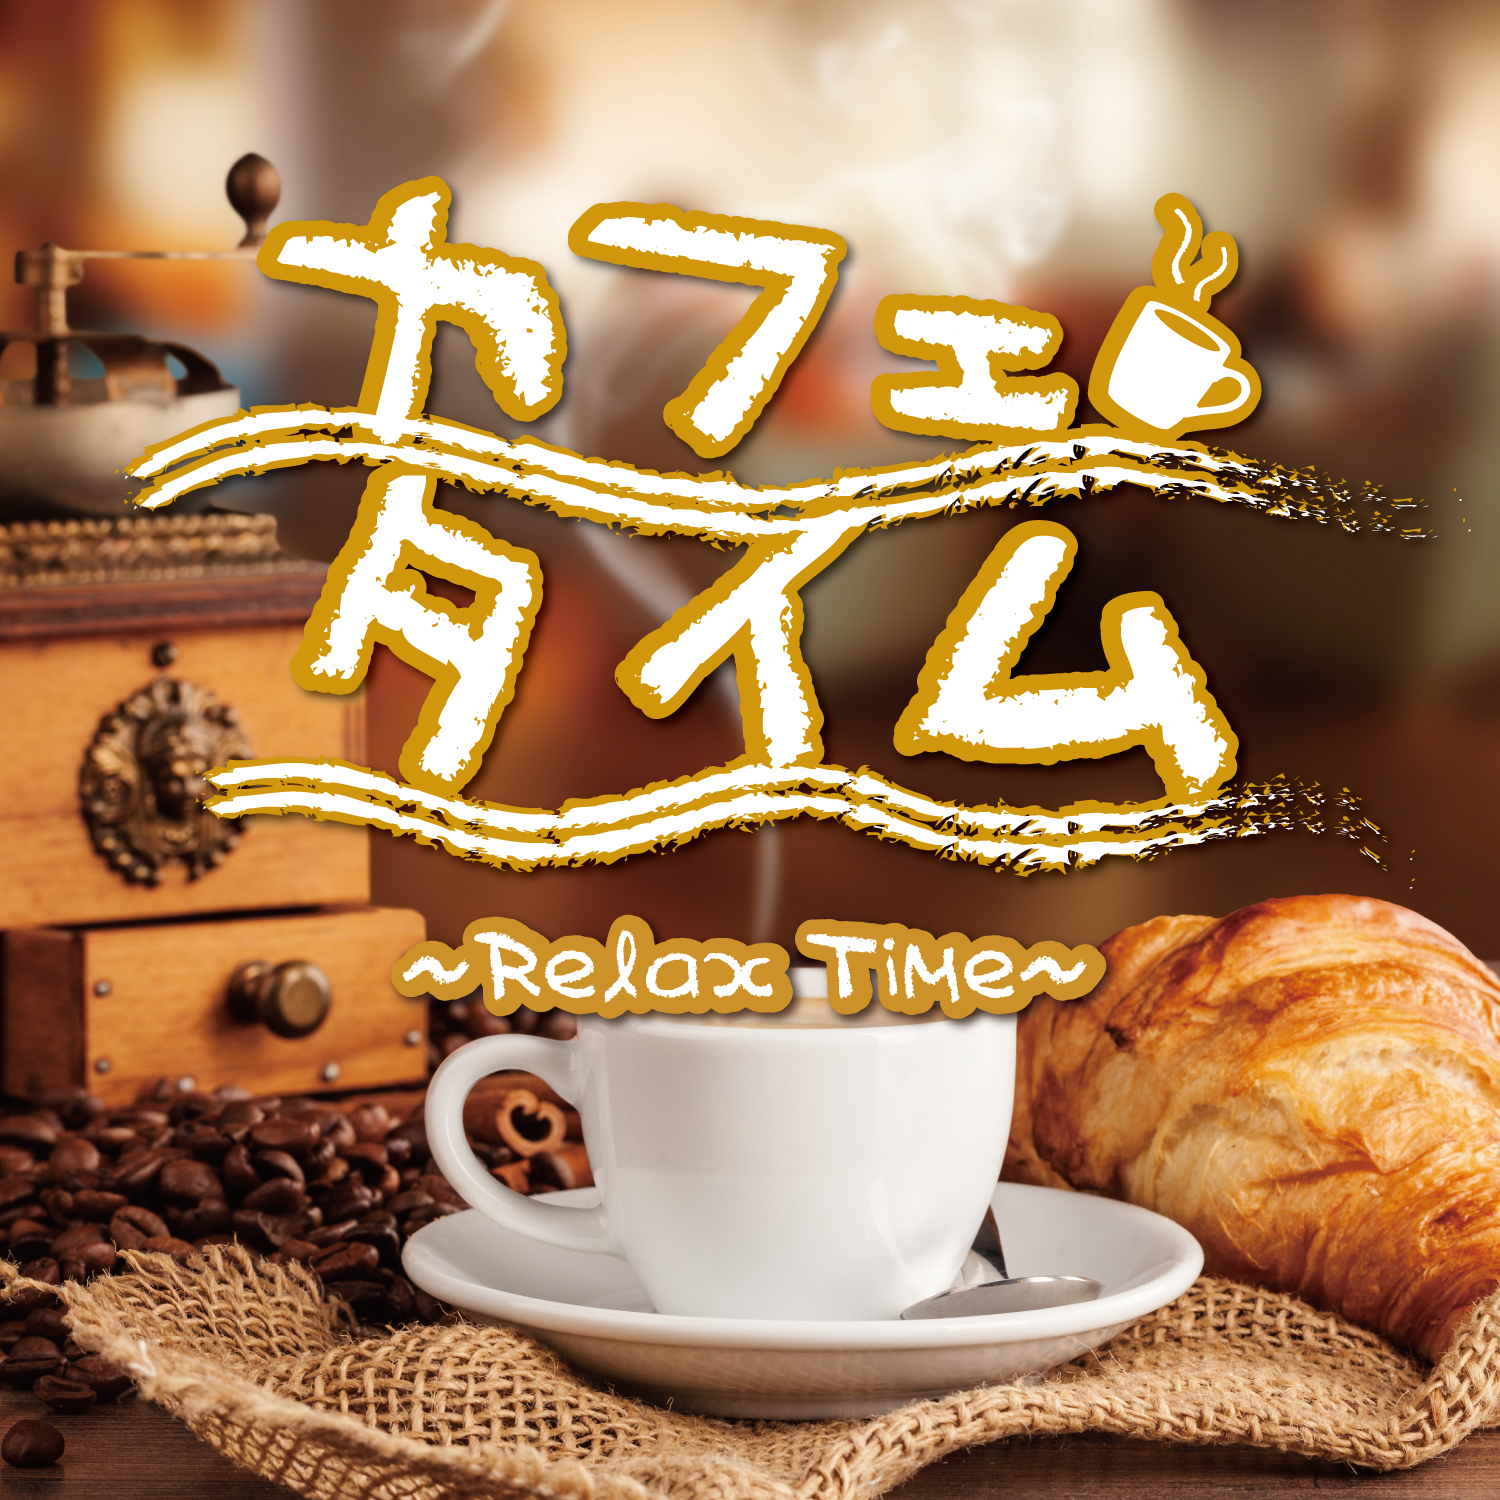 Sweet And Lovely(カフェタイム〜Rerax Time〜)/ジョージ・シアリング